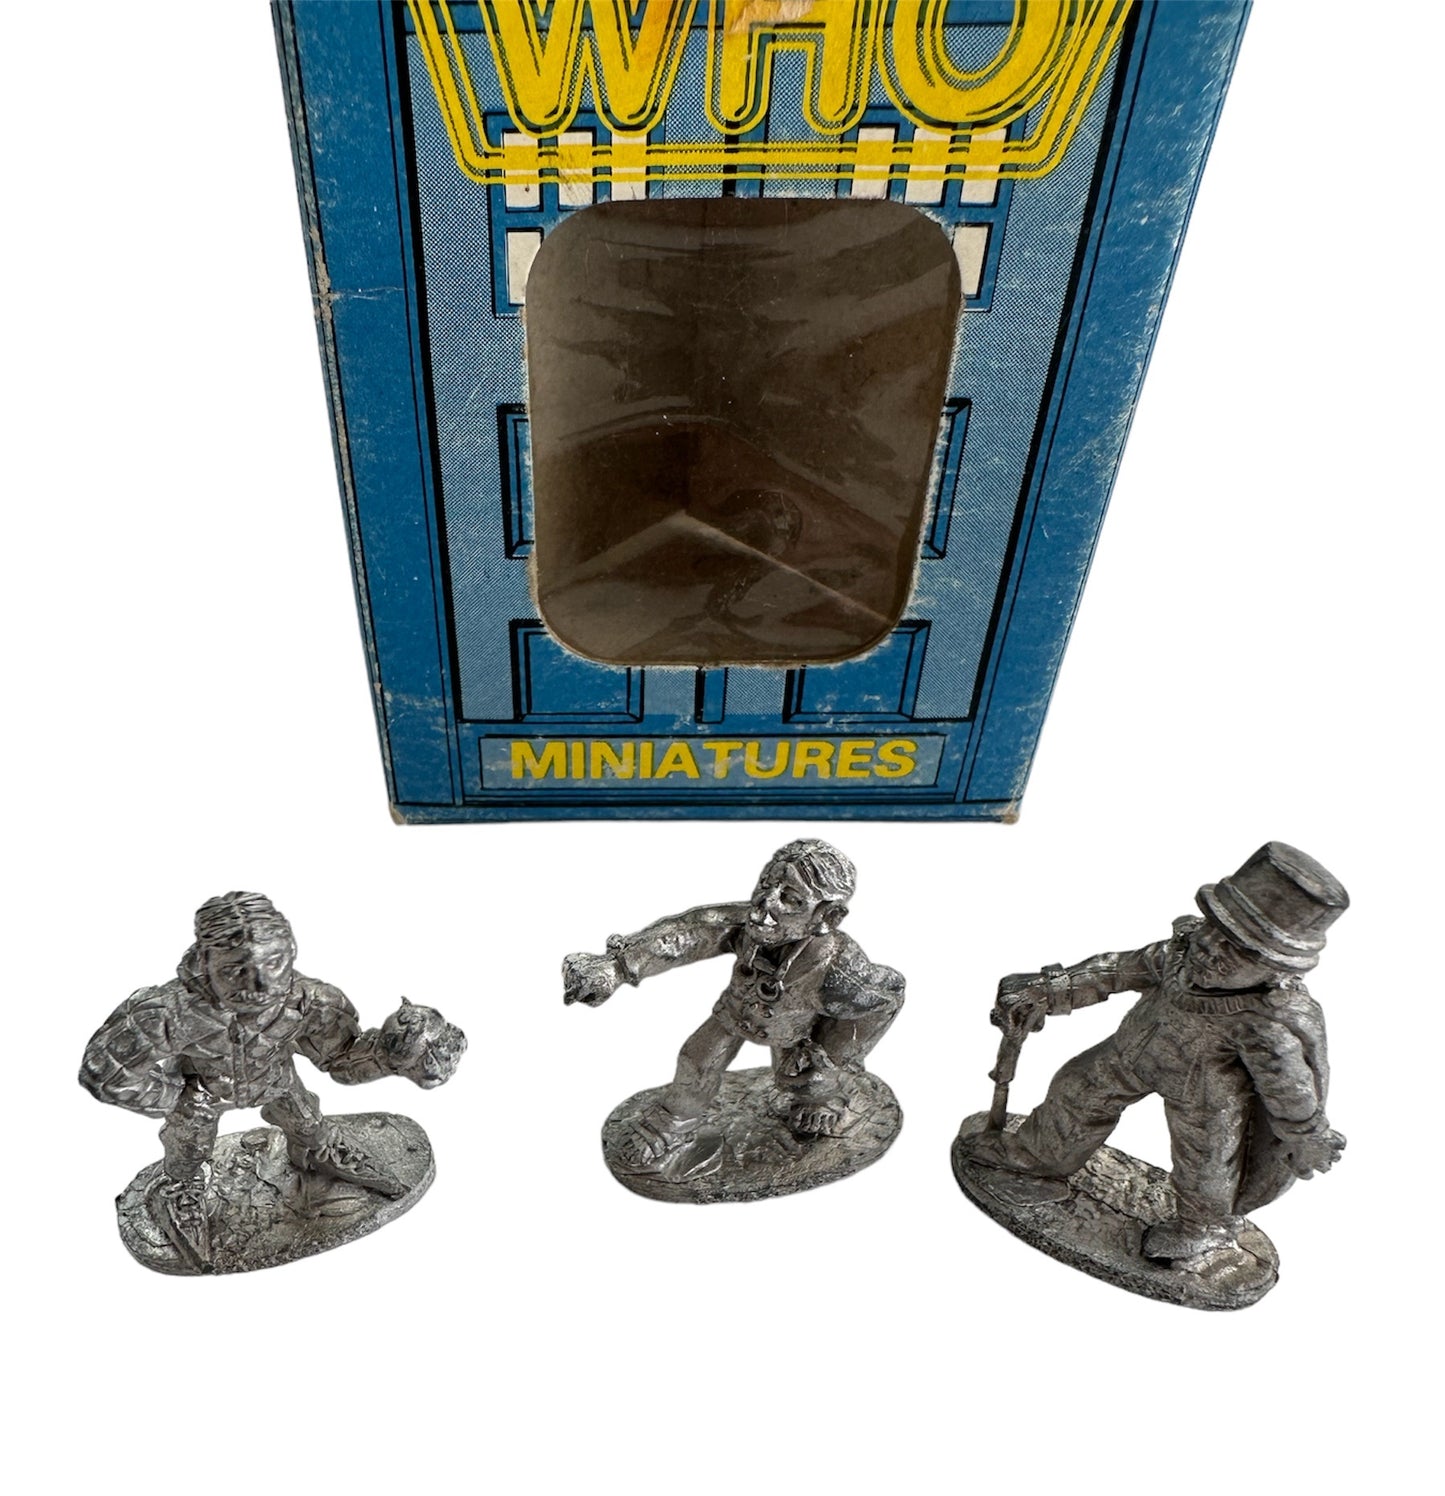 Vintage FASA Corp 1986 Doctor Dr Who Citadel Miniatures Metal Figures No. 9507 - Player Characters The Time Lords - Set Of 3 Figures - In The Original Box - Shop Stock Room Find